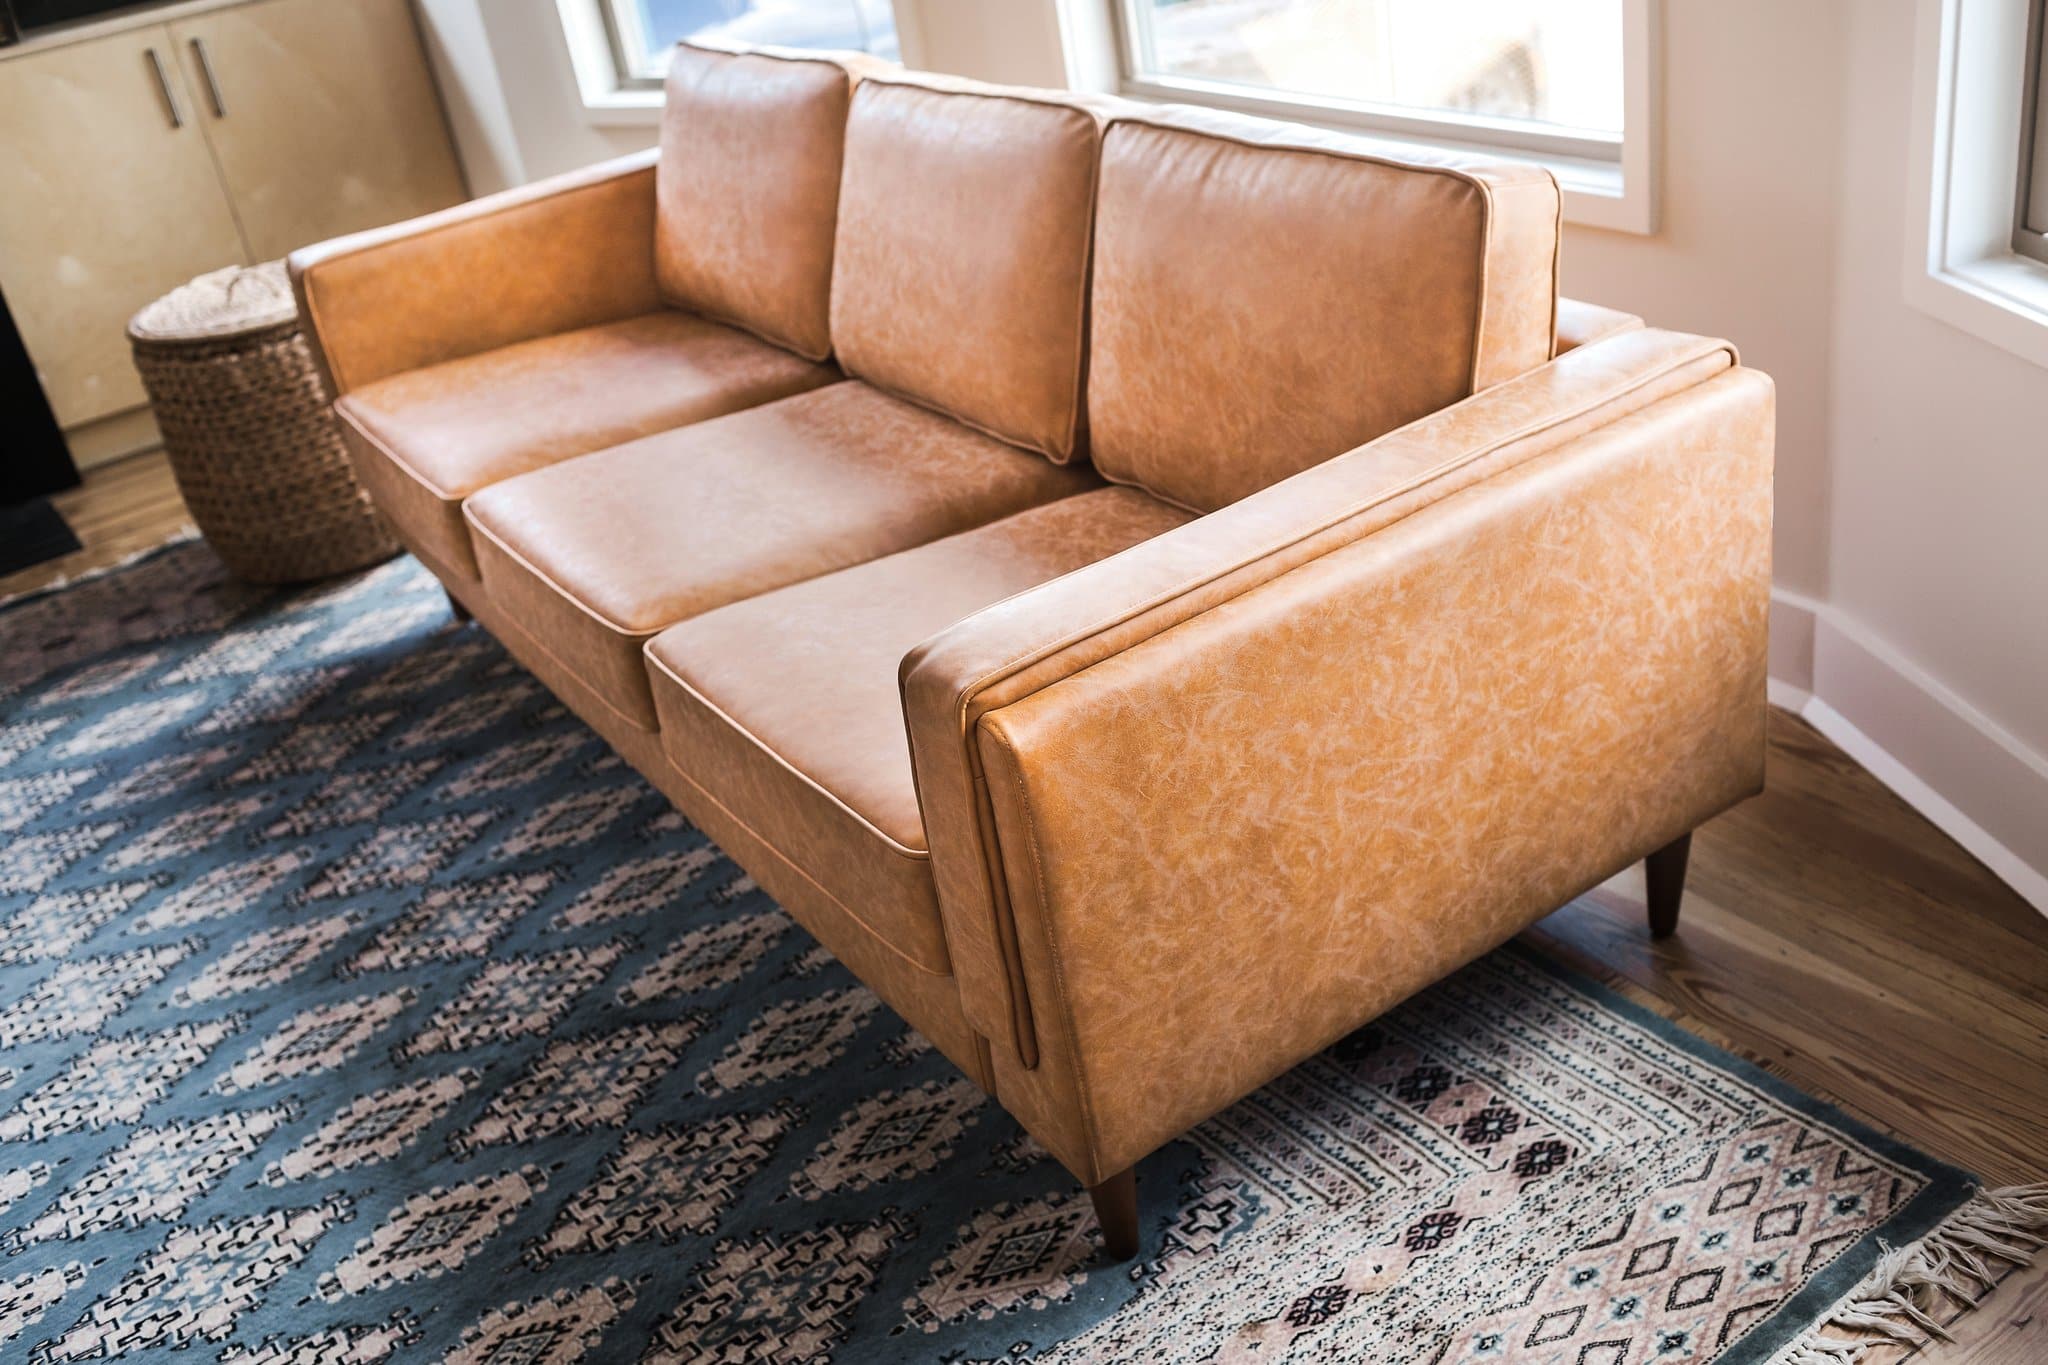 Albany Park Mid-Century Modern Couch - Cozy Designer Sofa Distressed Vegan Leather / Gold